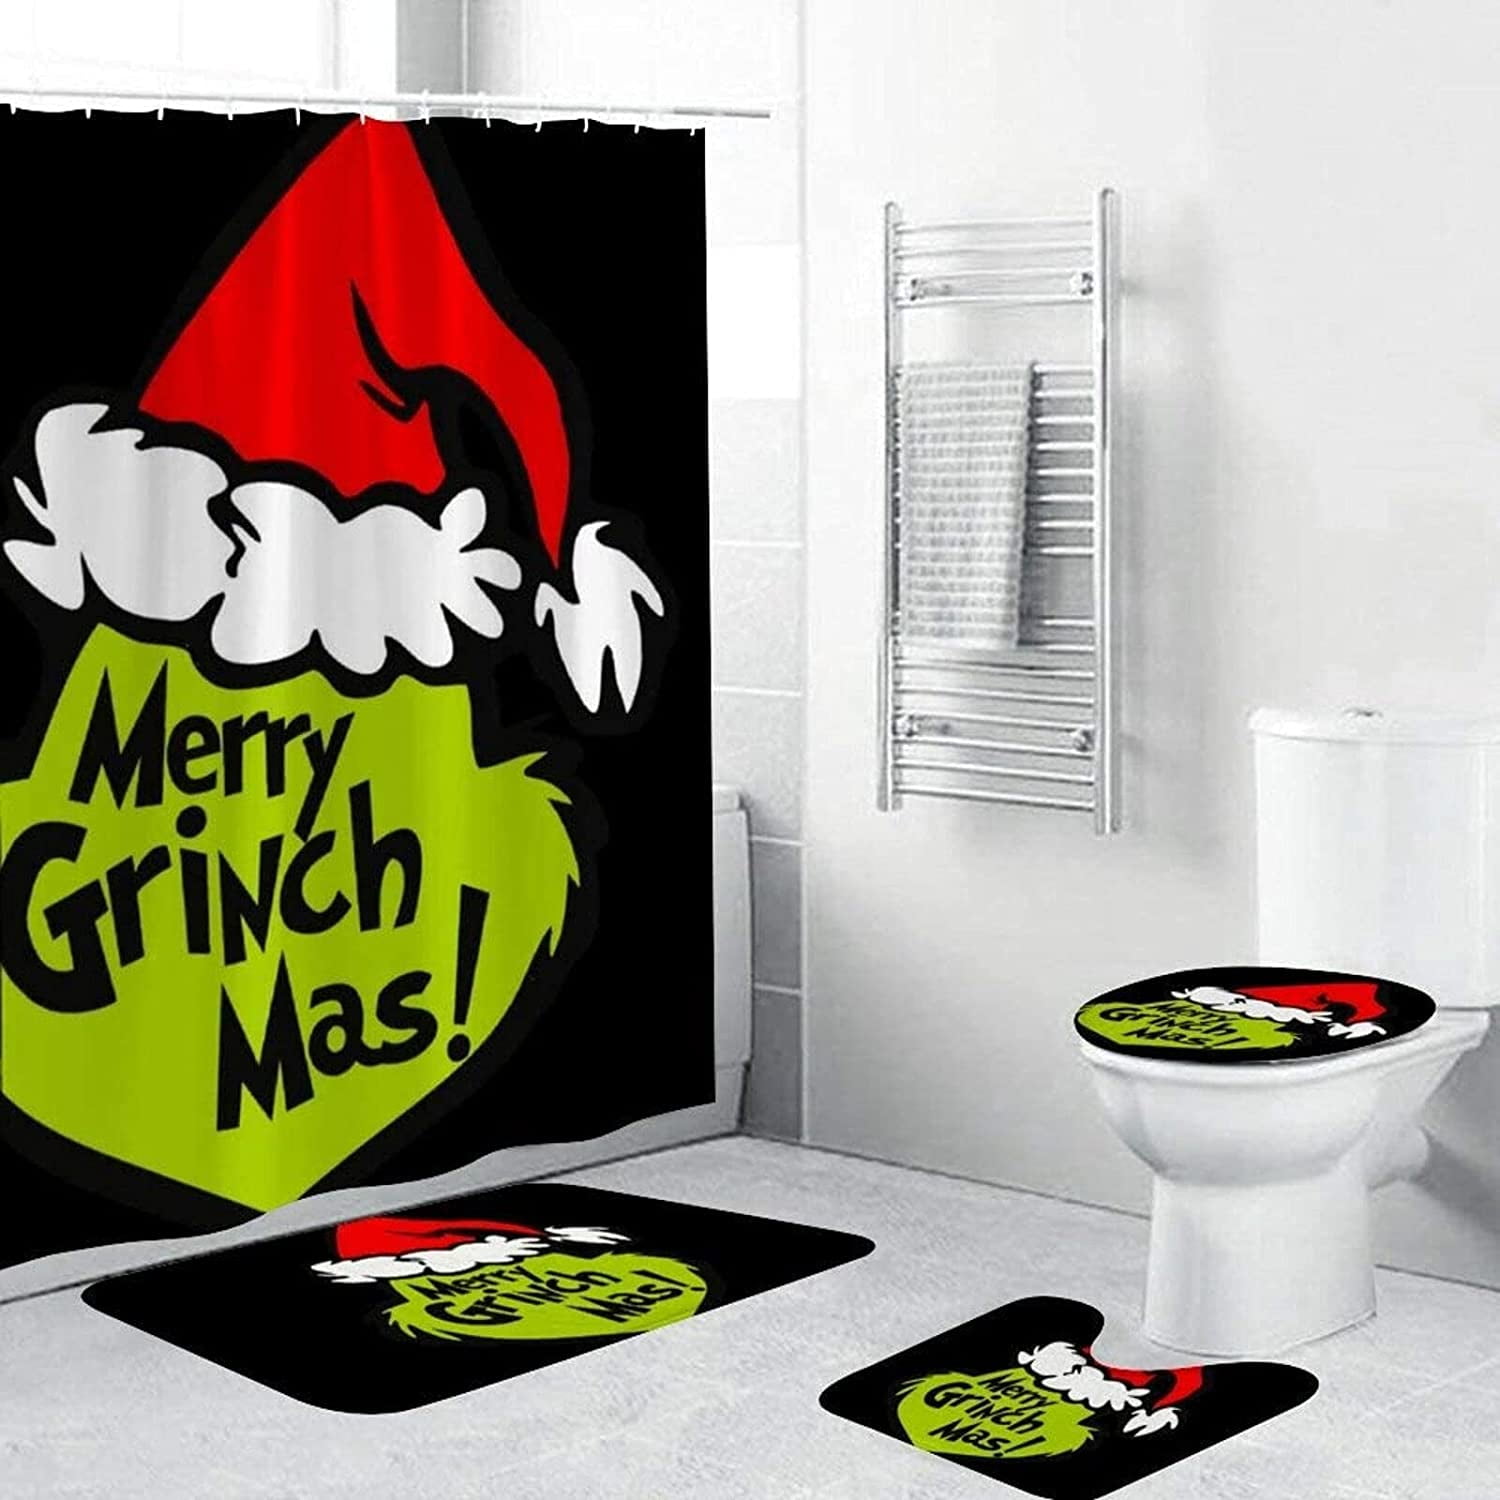 The Nightmare Before Christmas Shower Curtain Bathroom MatToilet Seat Lid Cover 